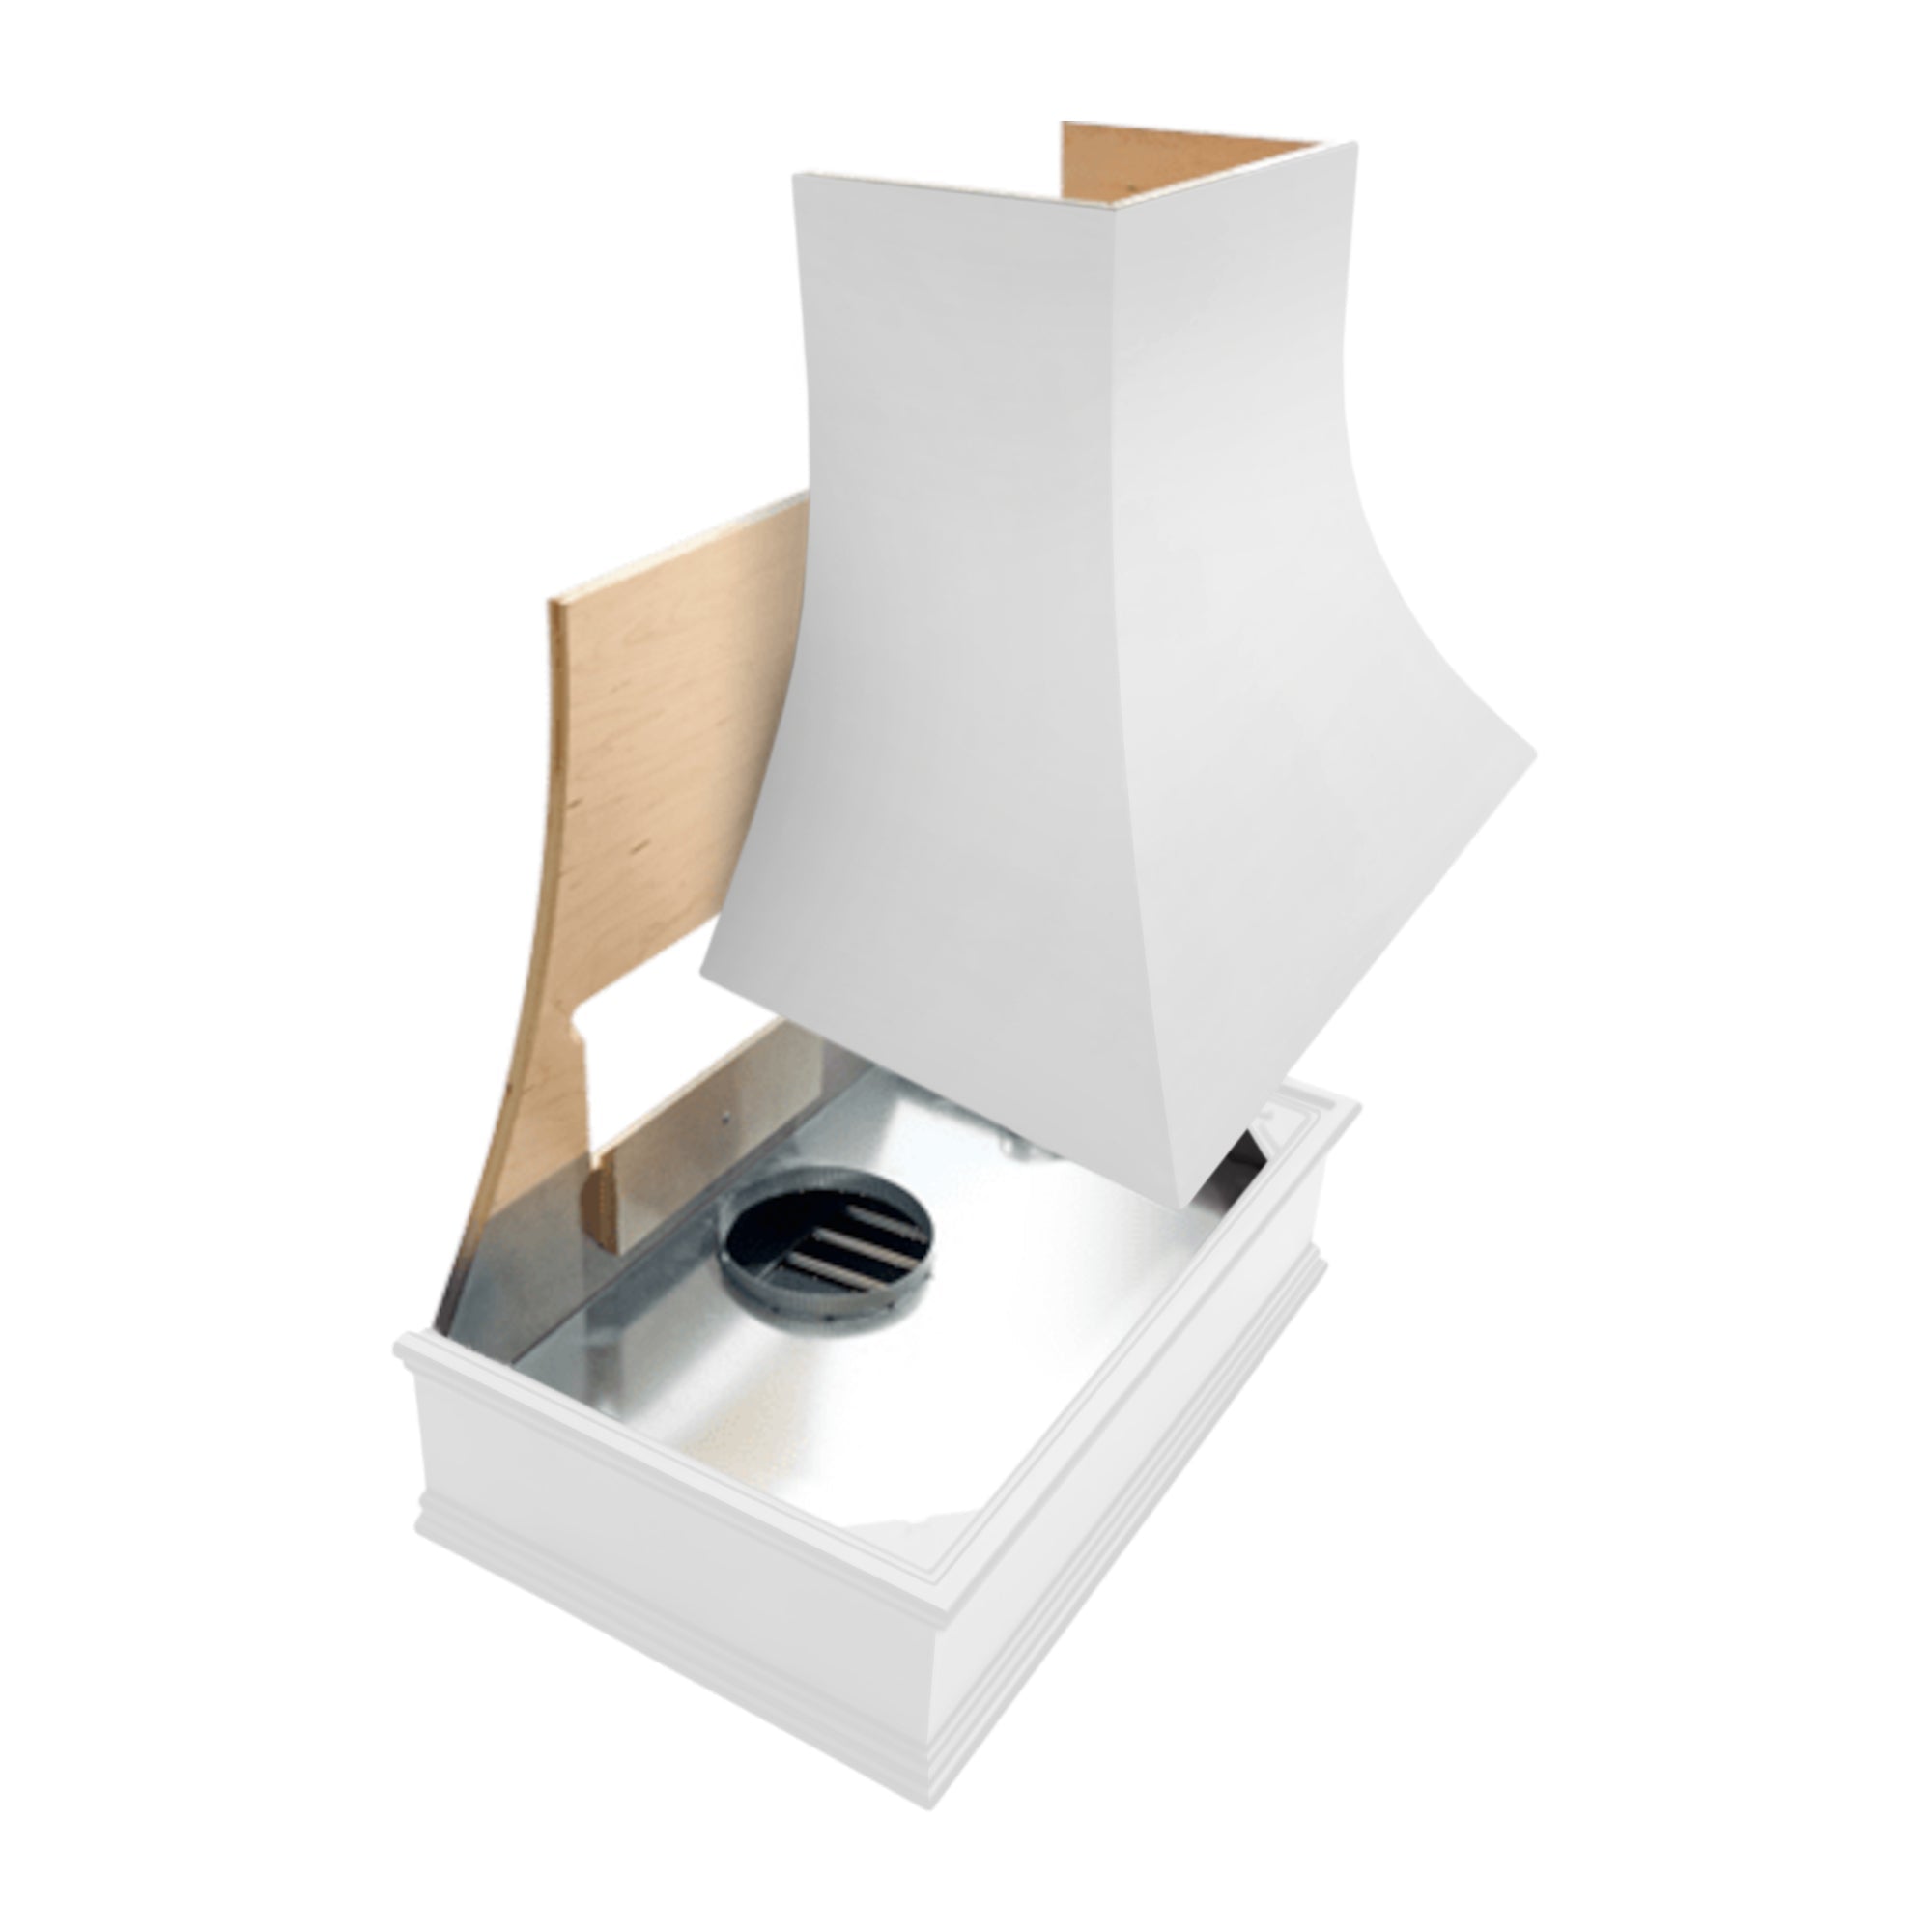 Primed Wood Range Hood With Angled Strapped Front and Block Trim - 30", 36", 42", 48", 54" and 60" Widths Available